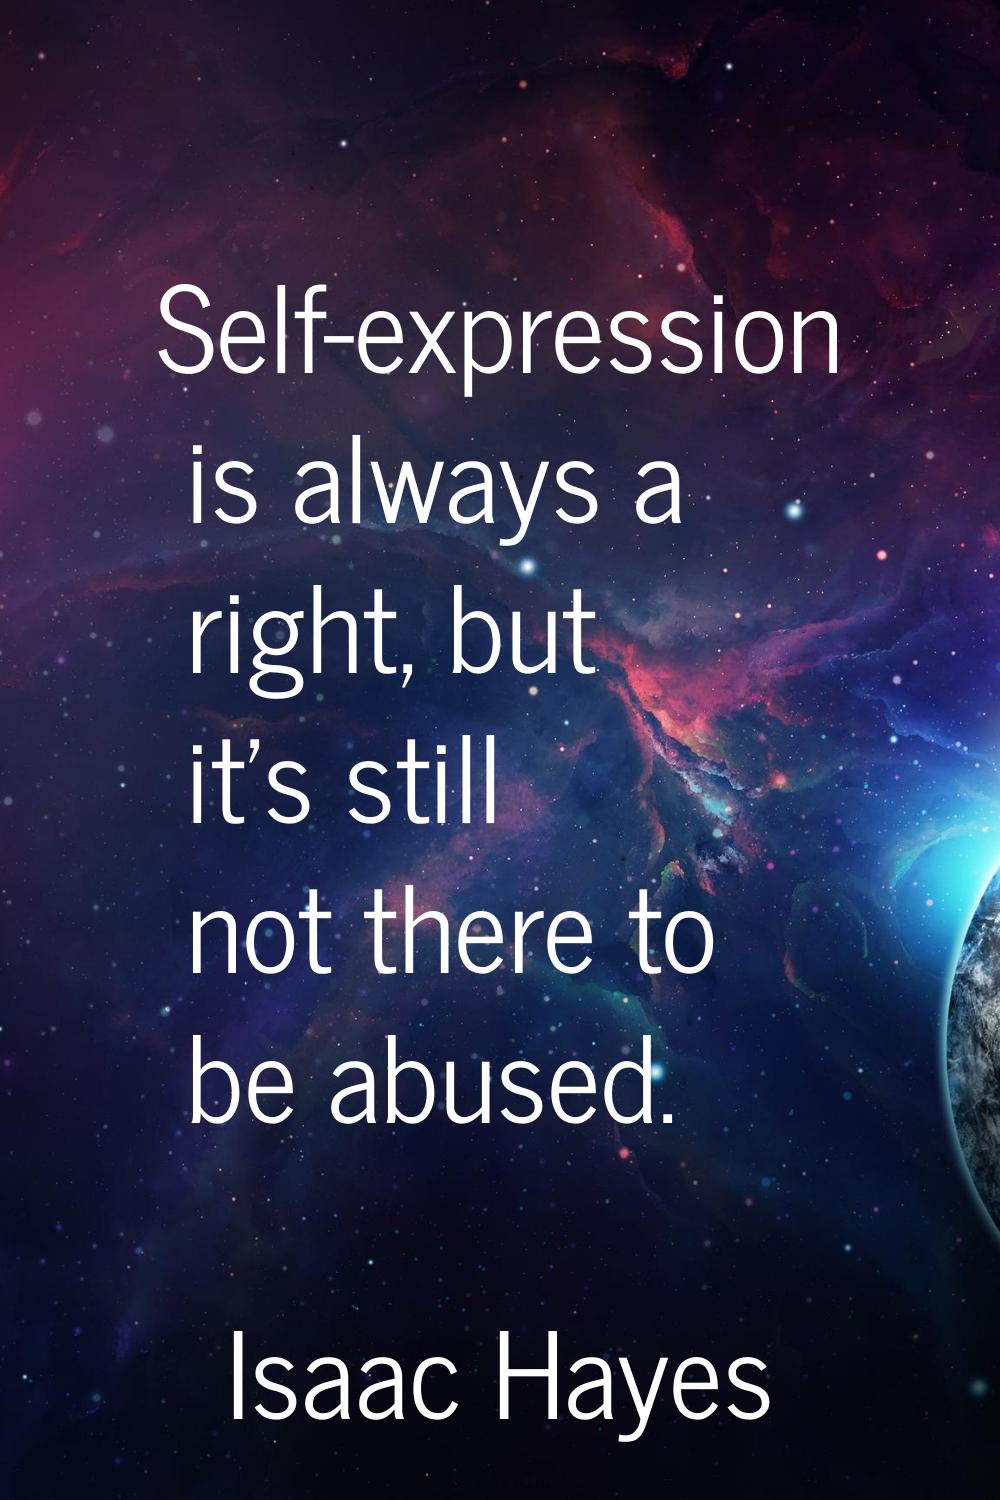 Self-expression is always a right, but it's still not there to be abused.